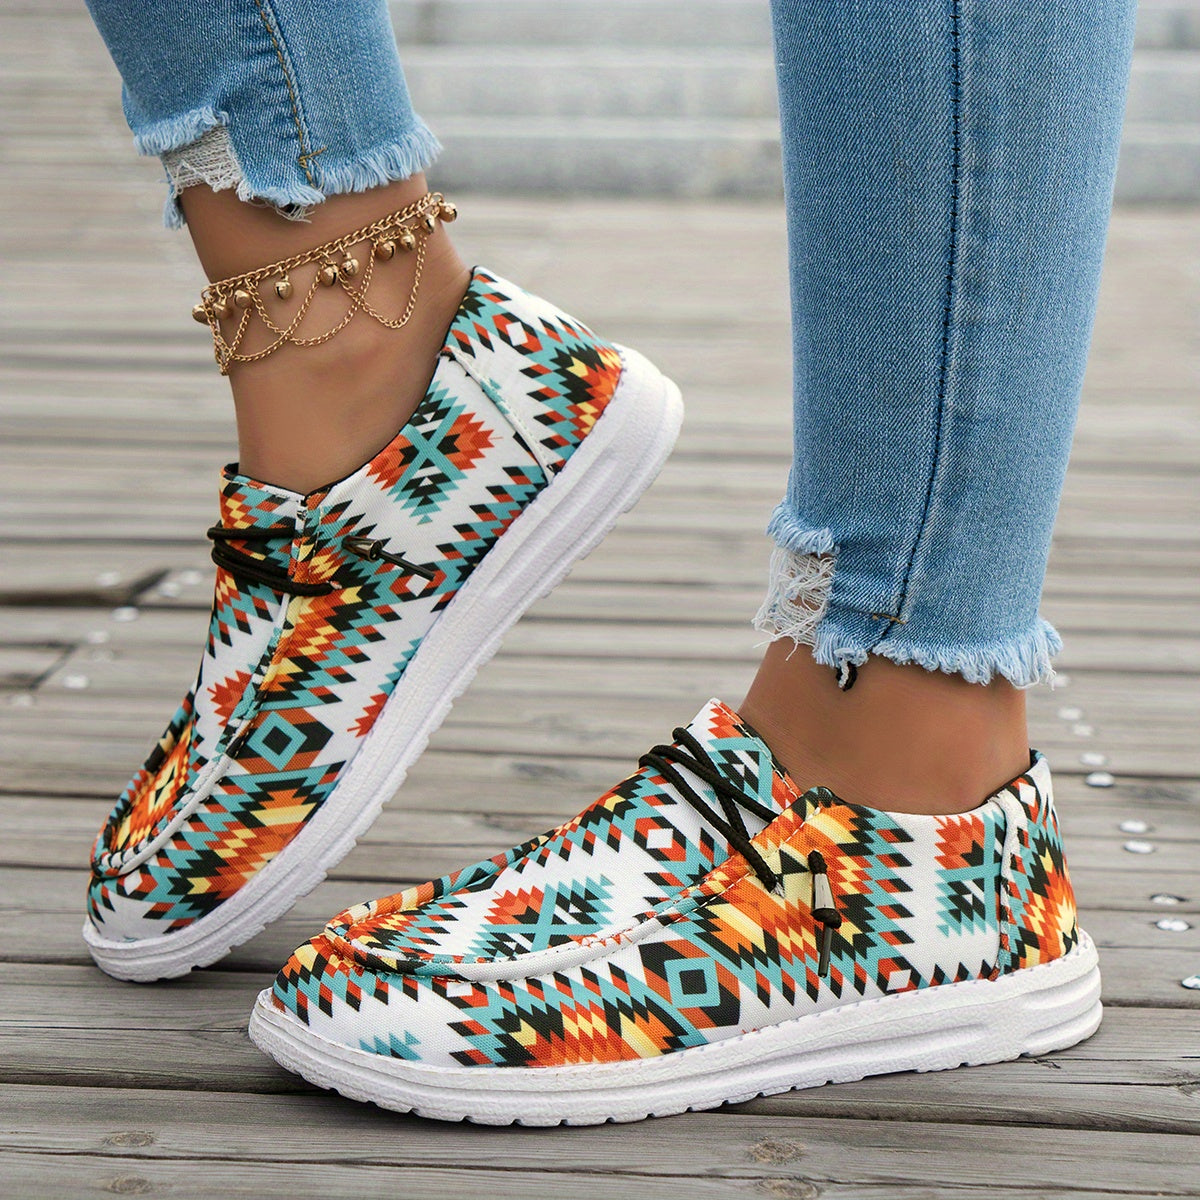 Women's Geometric Pattern Canvas Shoes, Casual Lace Up Outdoor Sneakers, Lightweight Low Top Shoes